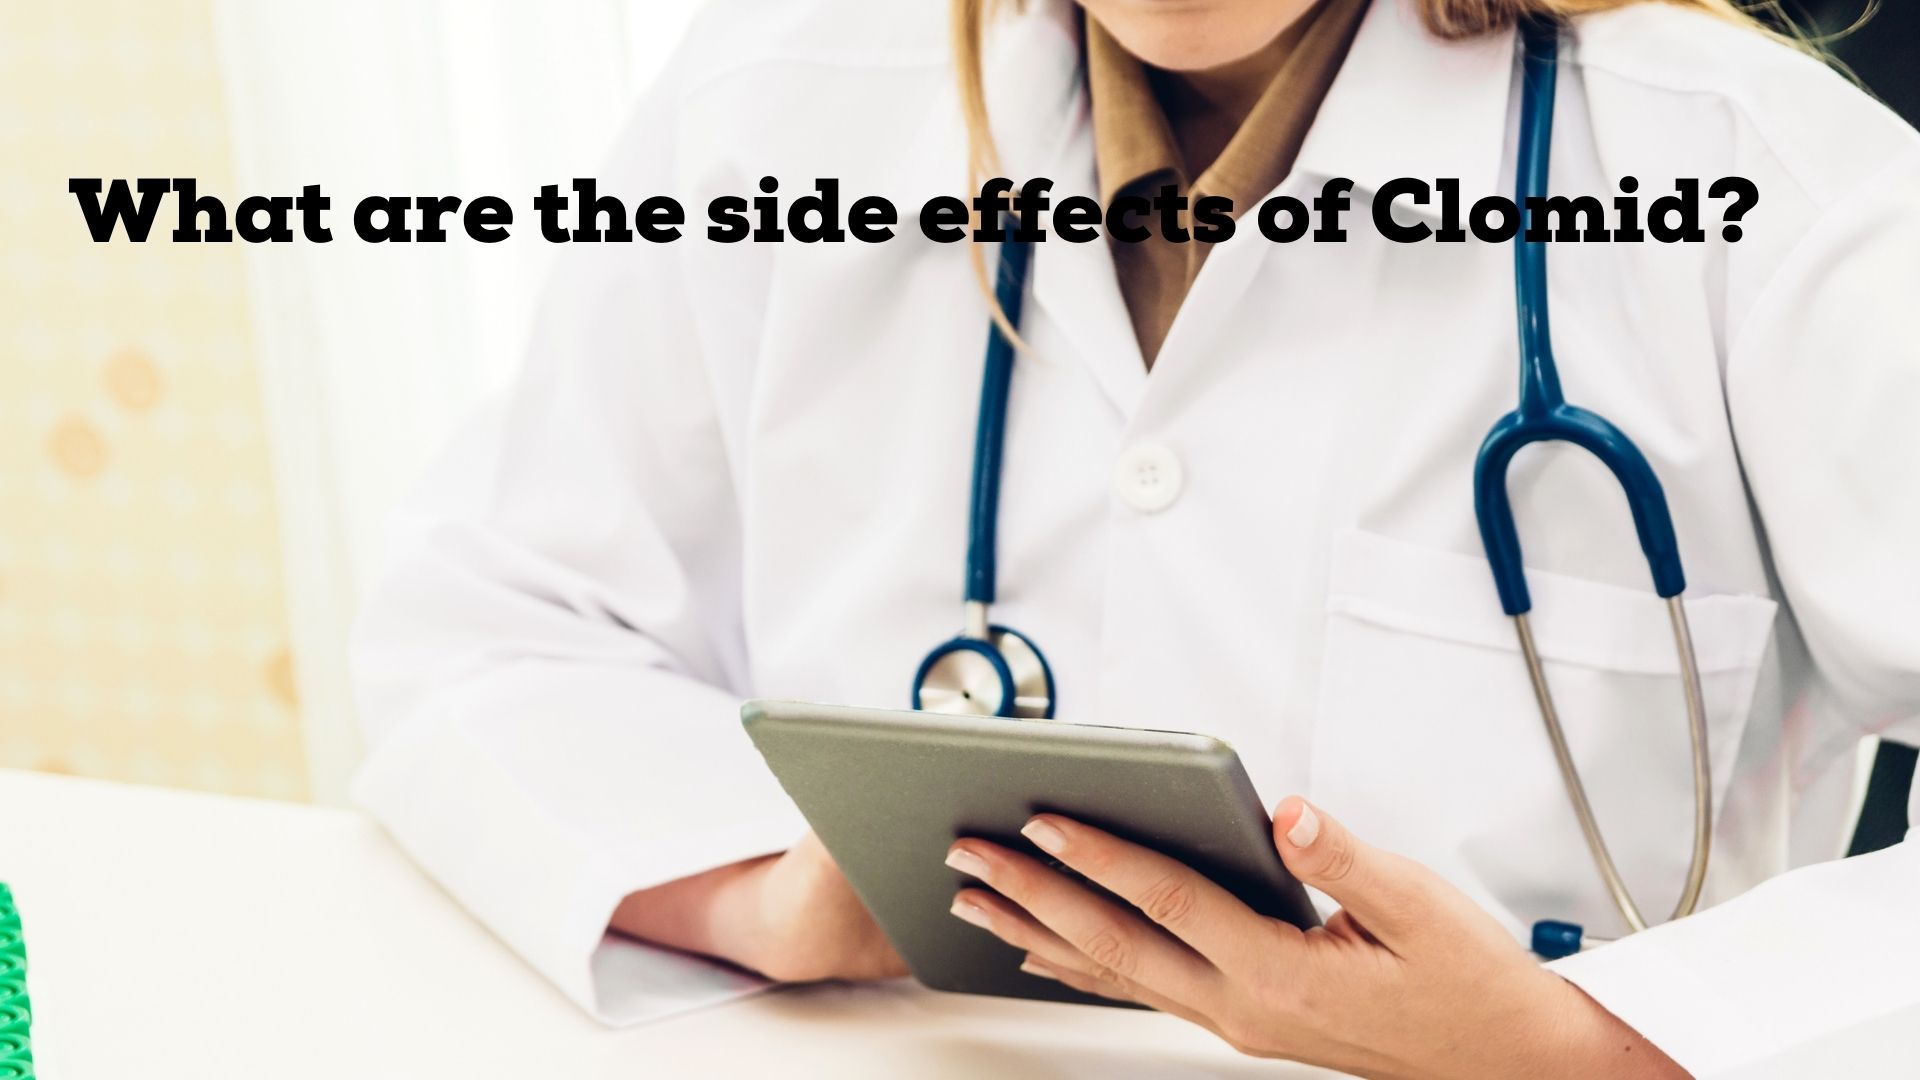 What are the side effects of Clomid?